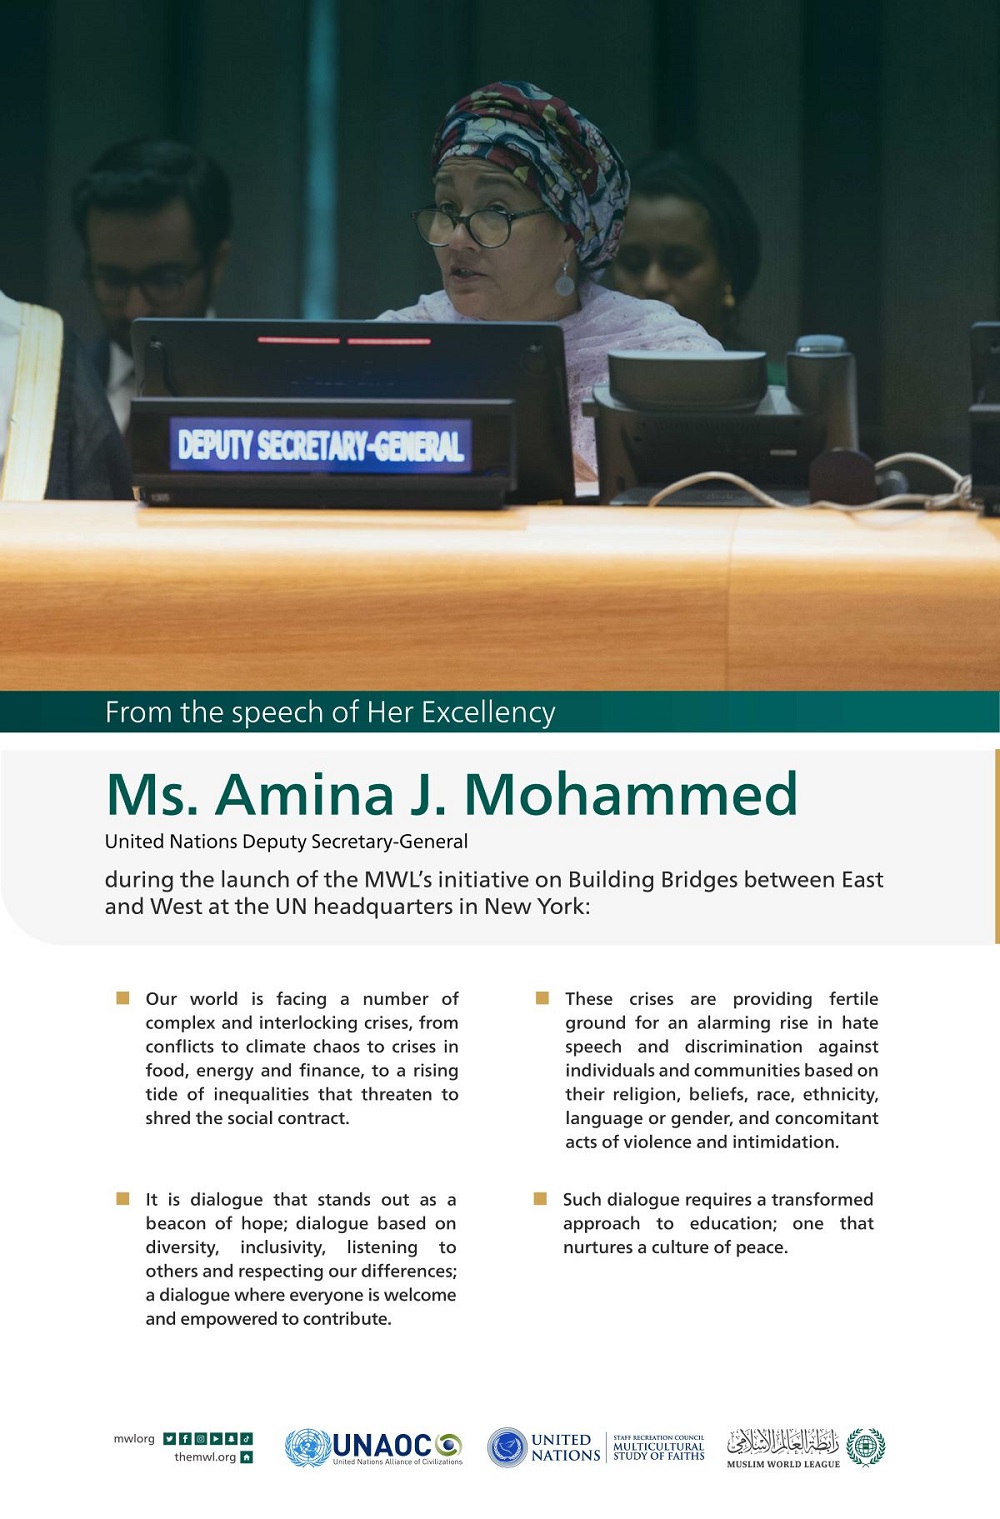 Highlights from the speech of Her Excellency Ms. Amina J. Mohammed, the ...